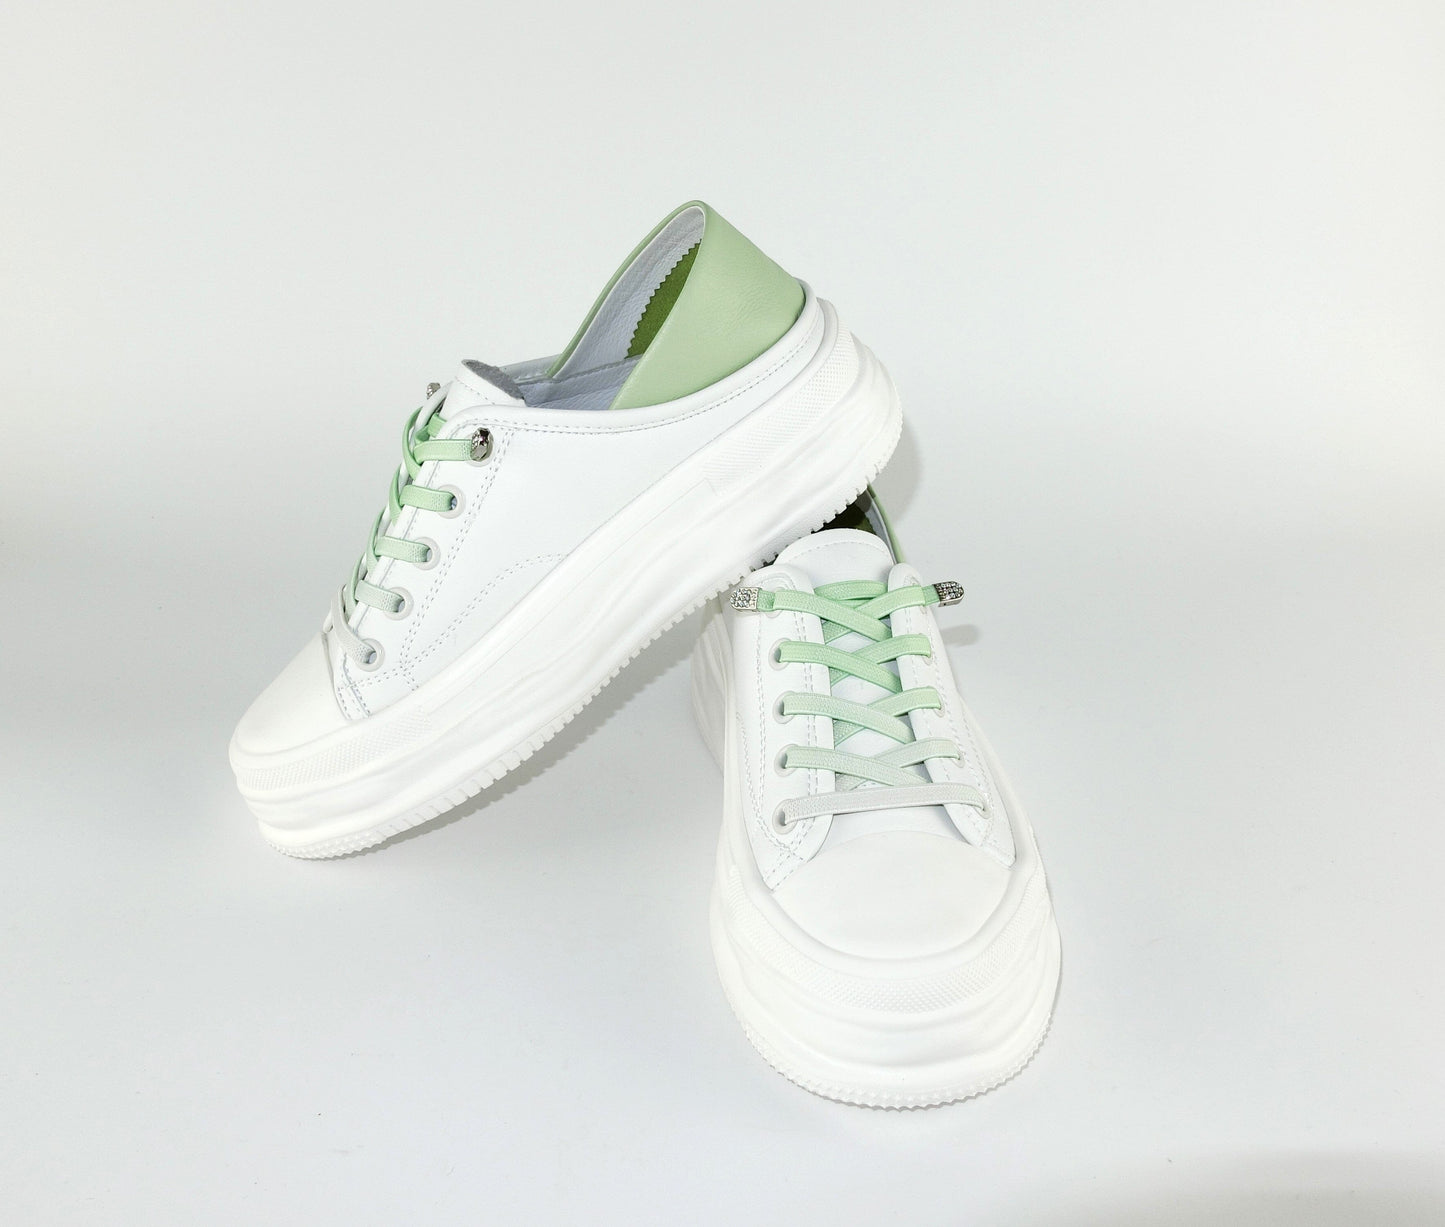 SS23003 Genuine leather white sneakers with cushions- Mint and Pale blue sneakers Sam Star Shoes White Mint 37/4 